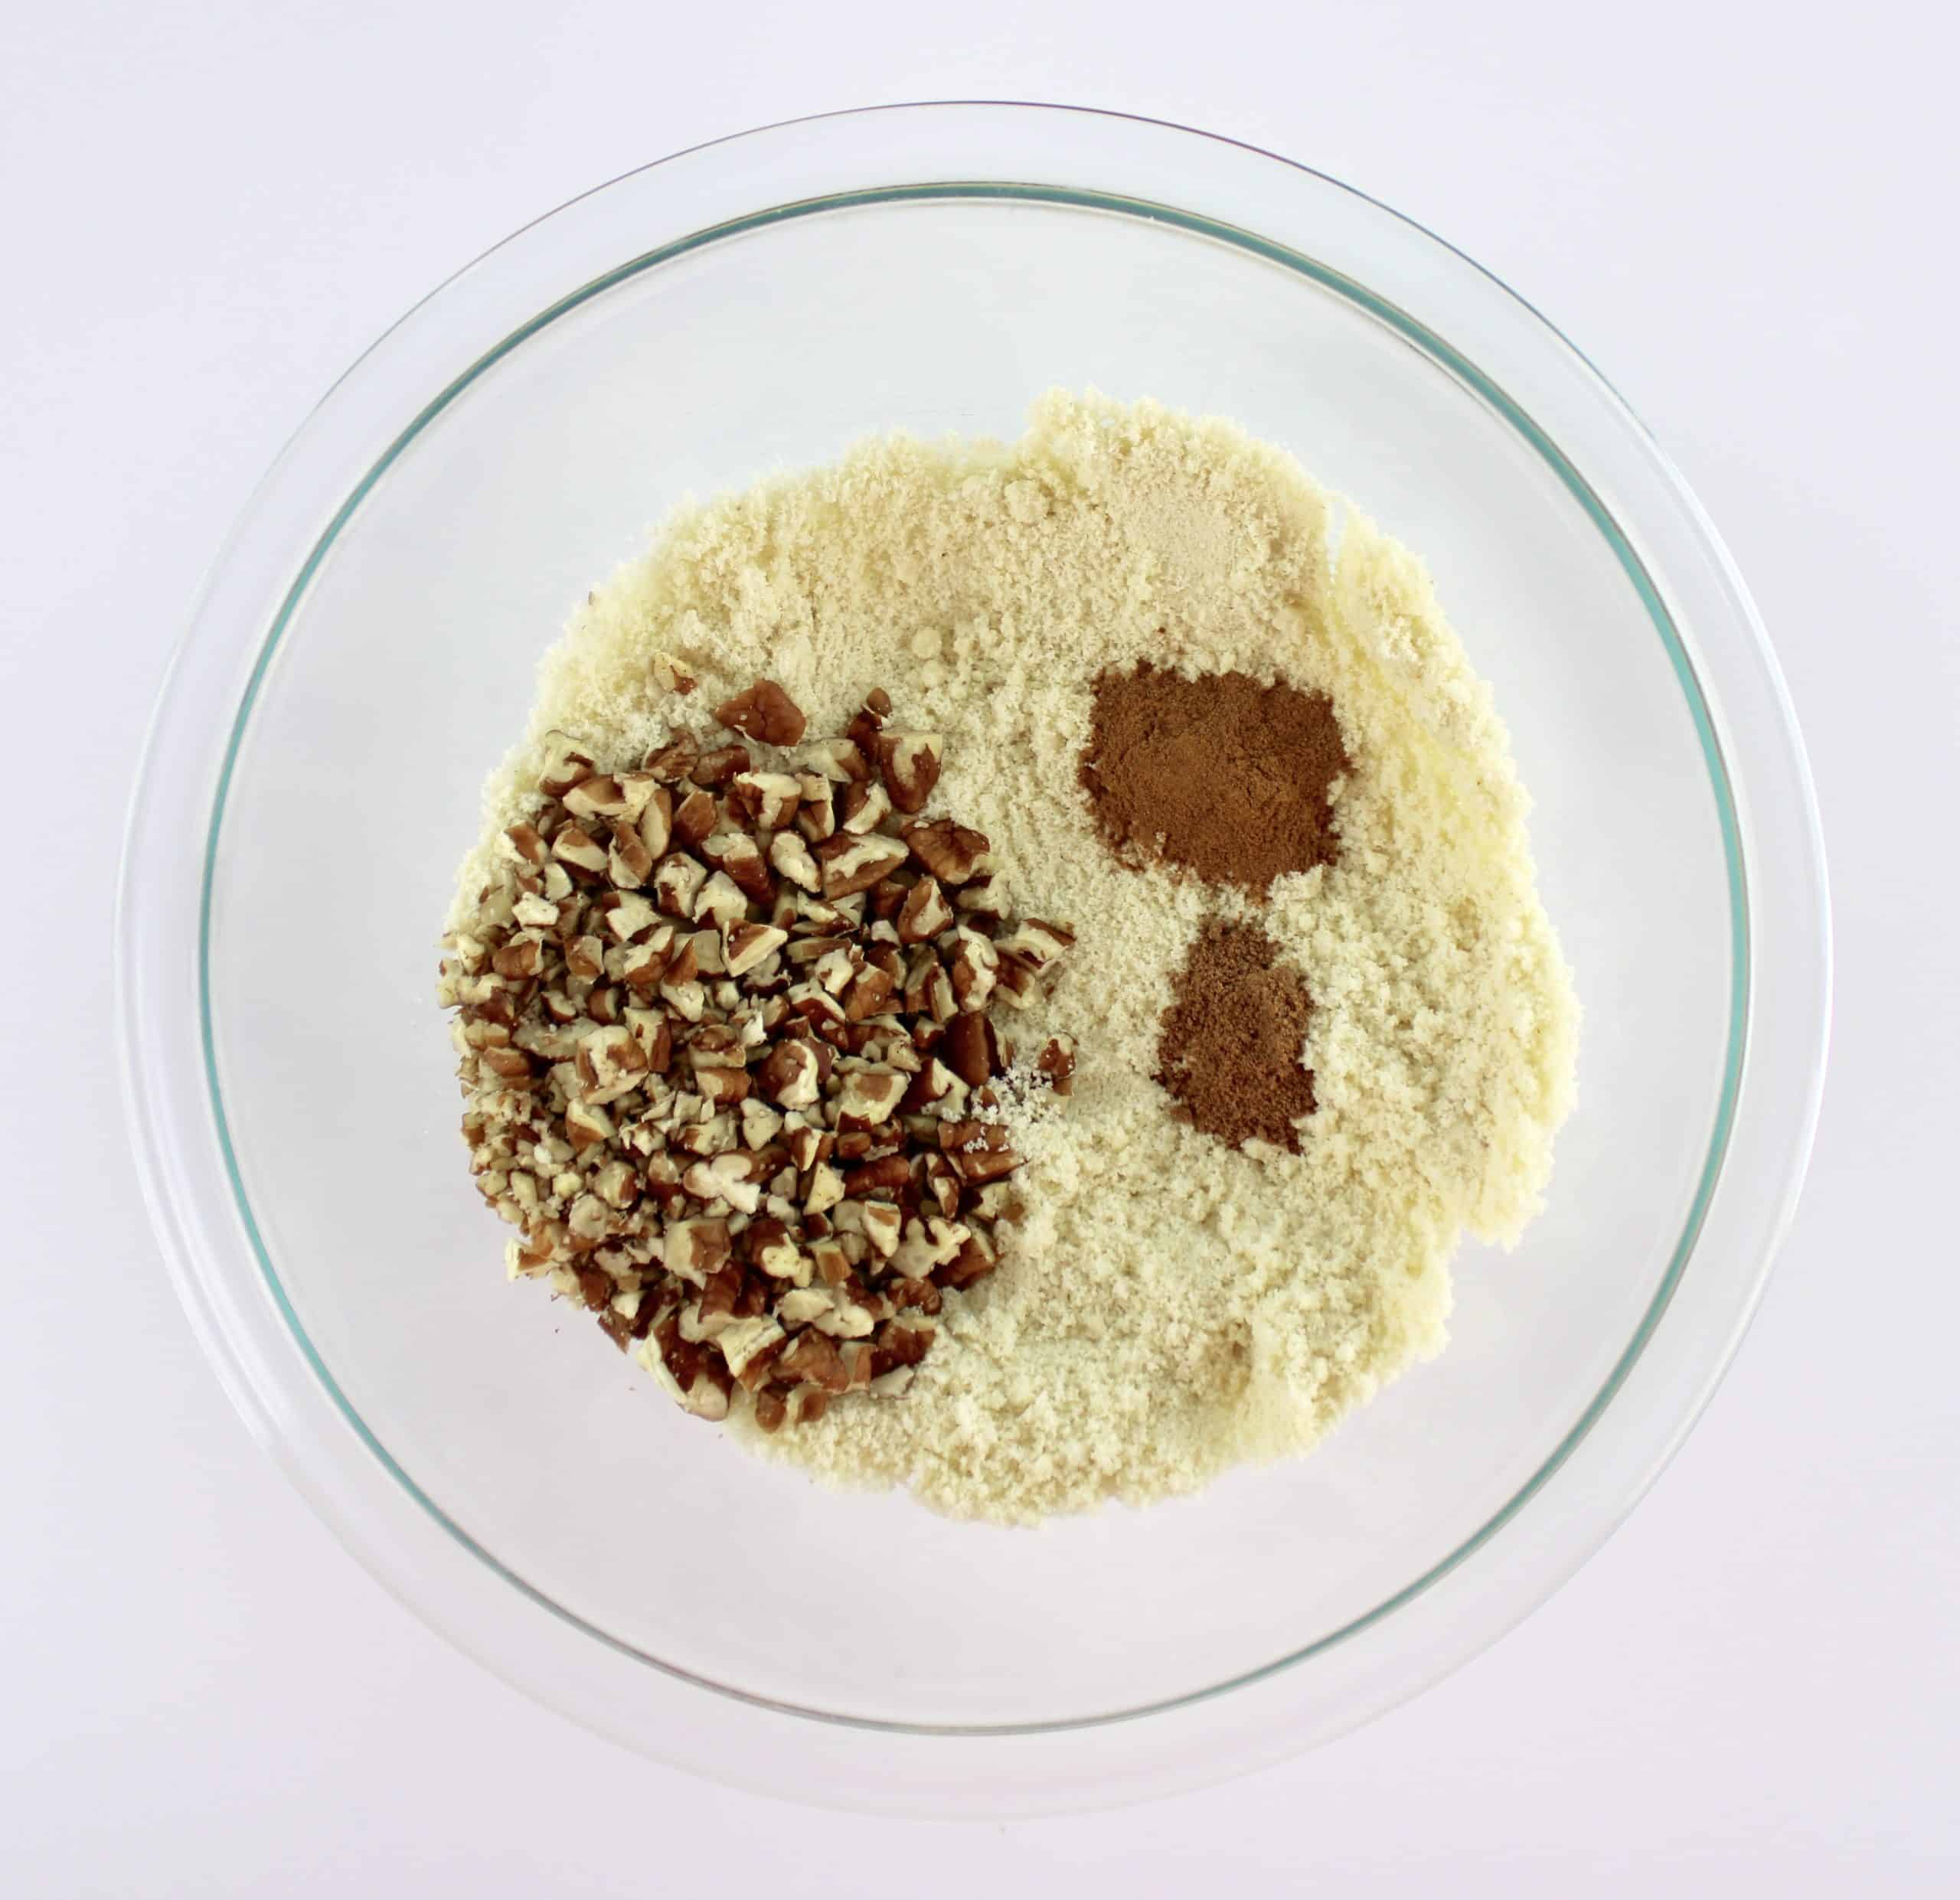 almond flour spices and chopped pecans in glass bowl unmixed